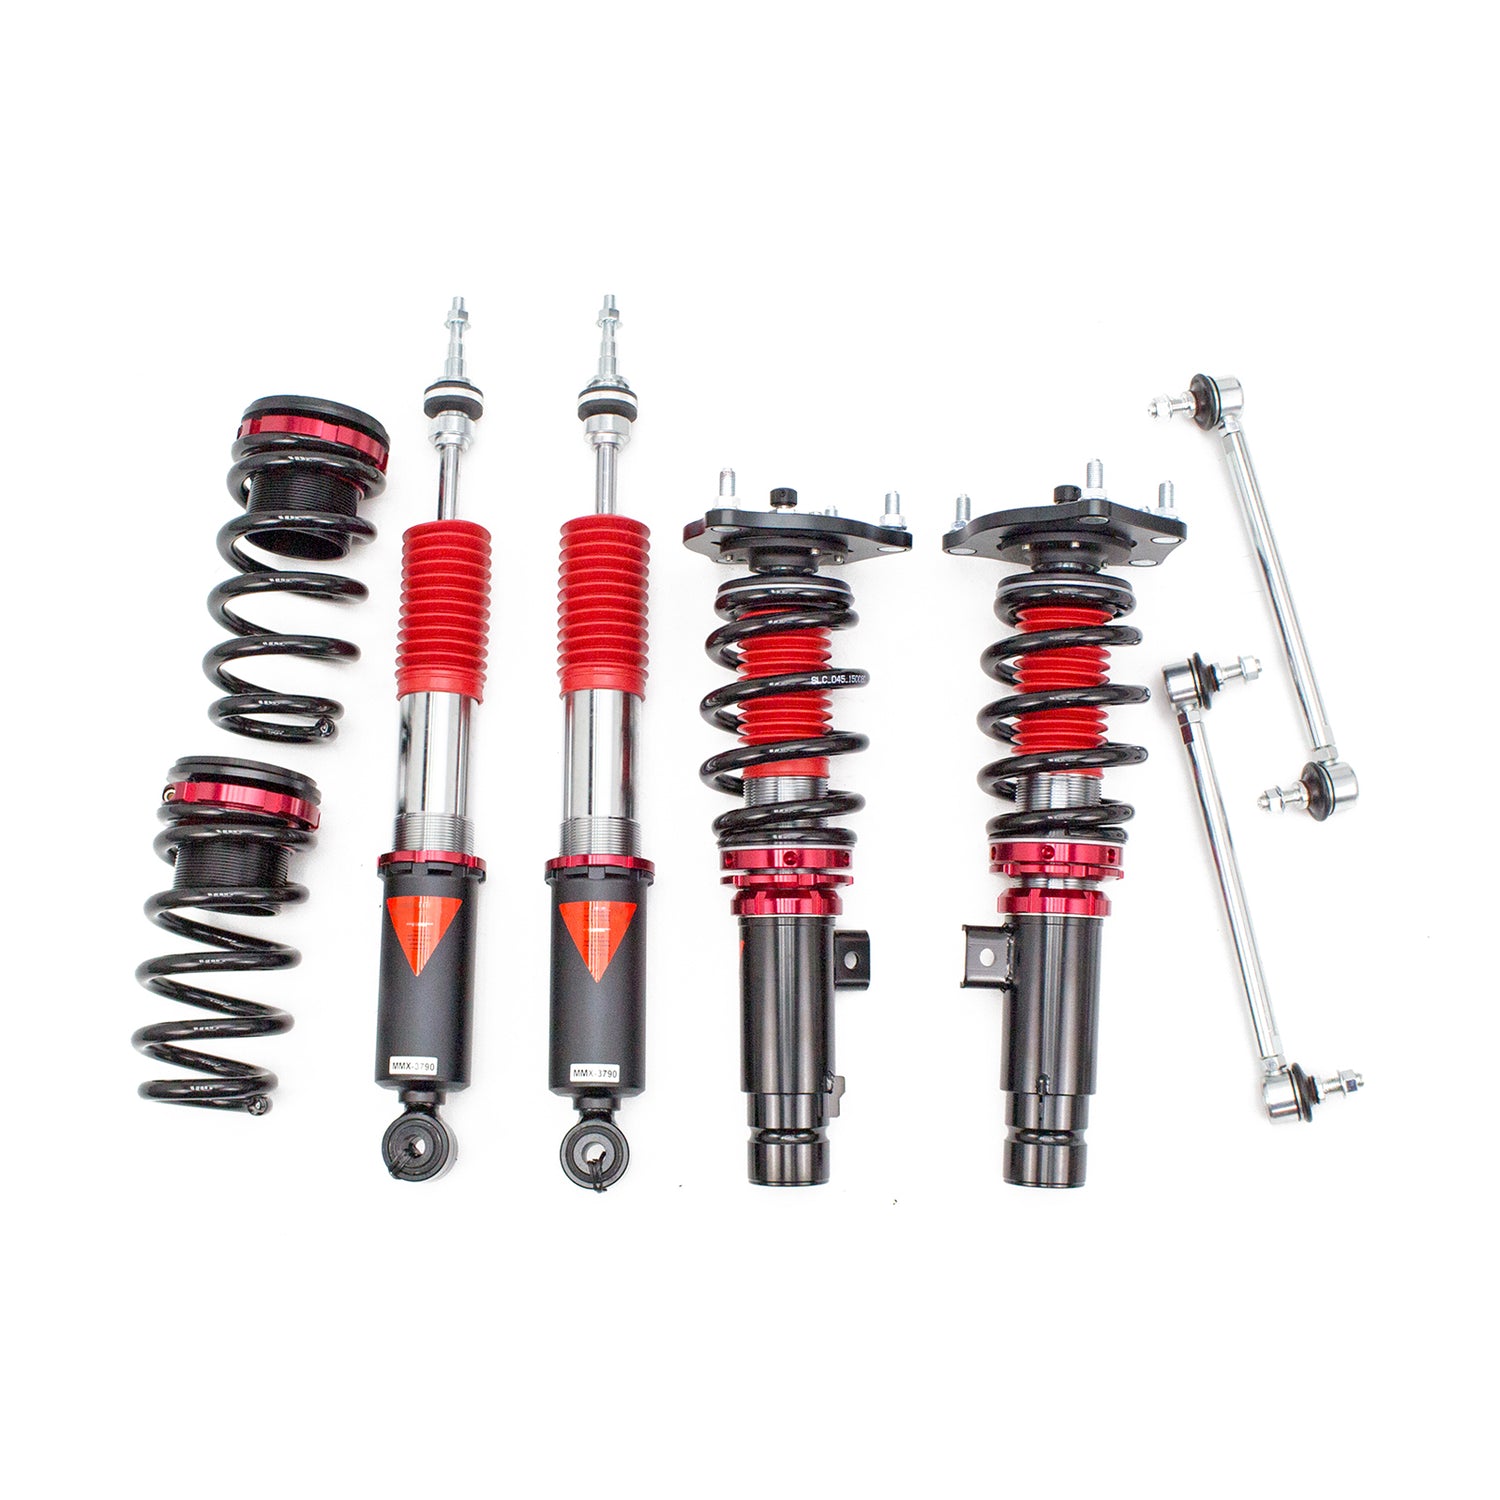 MMX3790-52 MAXX Coilovers Lowering Kit, Fully Adjustable, Ride Height, 40 Clicks Rebound Settings, Honda Civic(FC) Sport/Touring 2016+Up